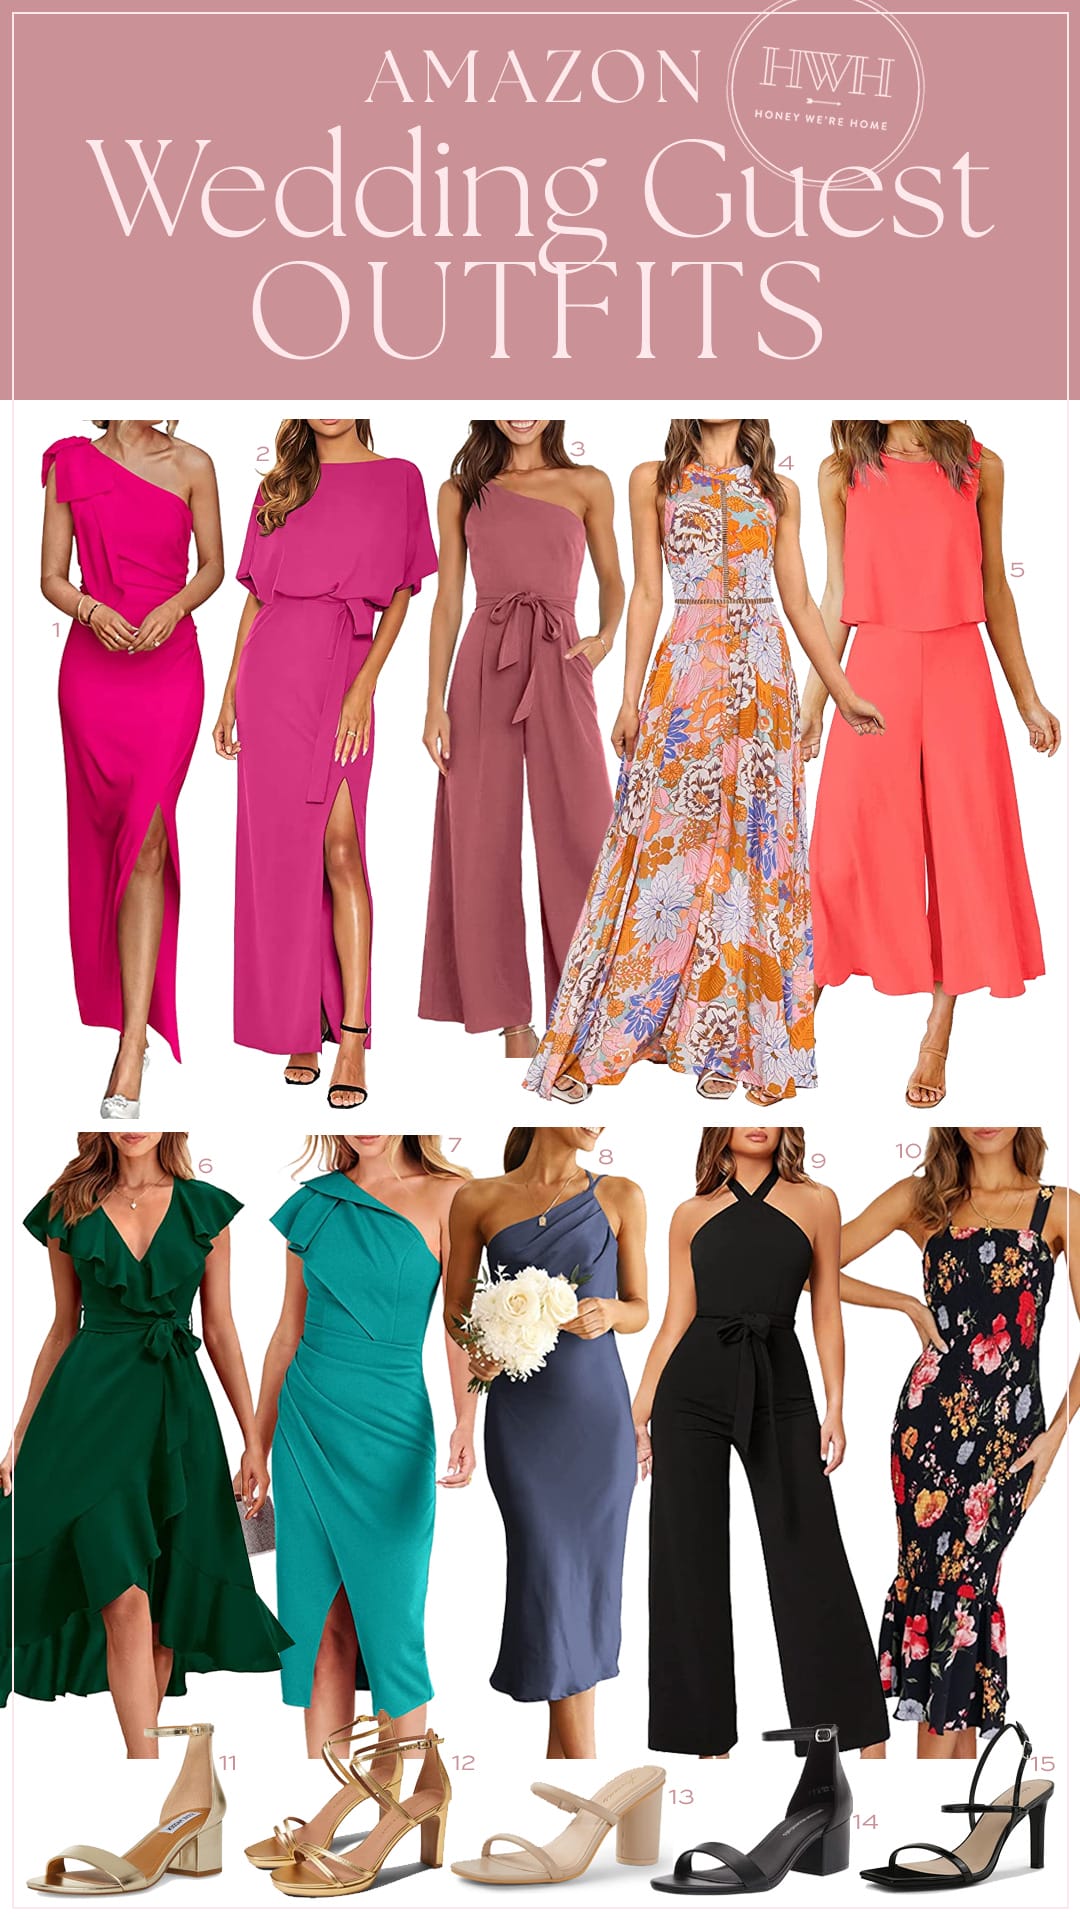 Amazon Wedding Guest Outfits